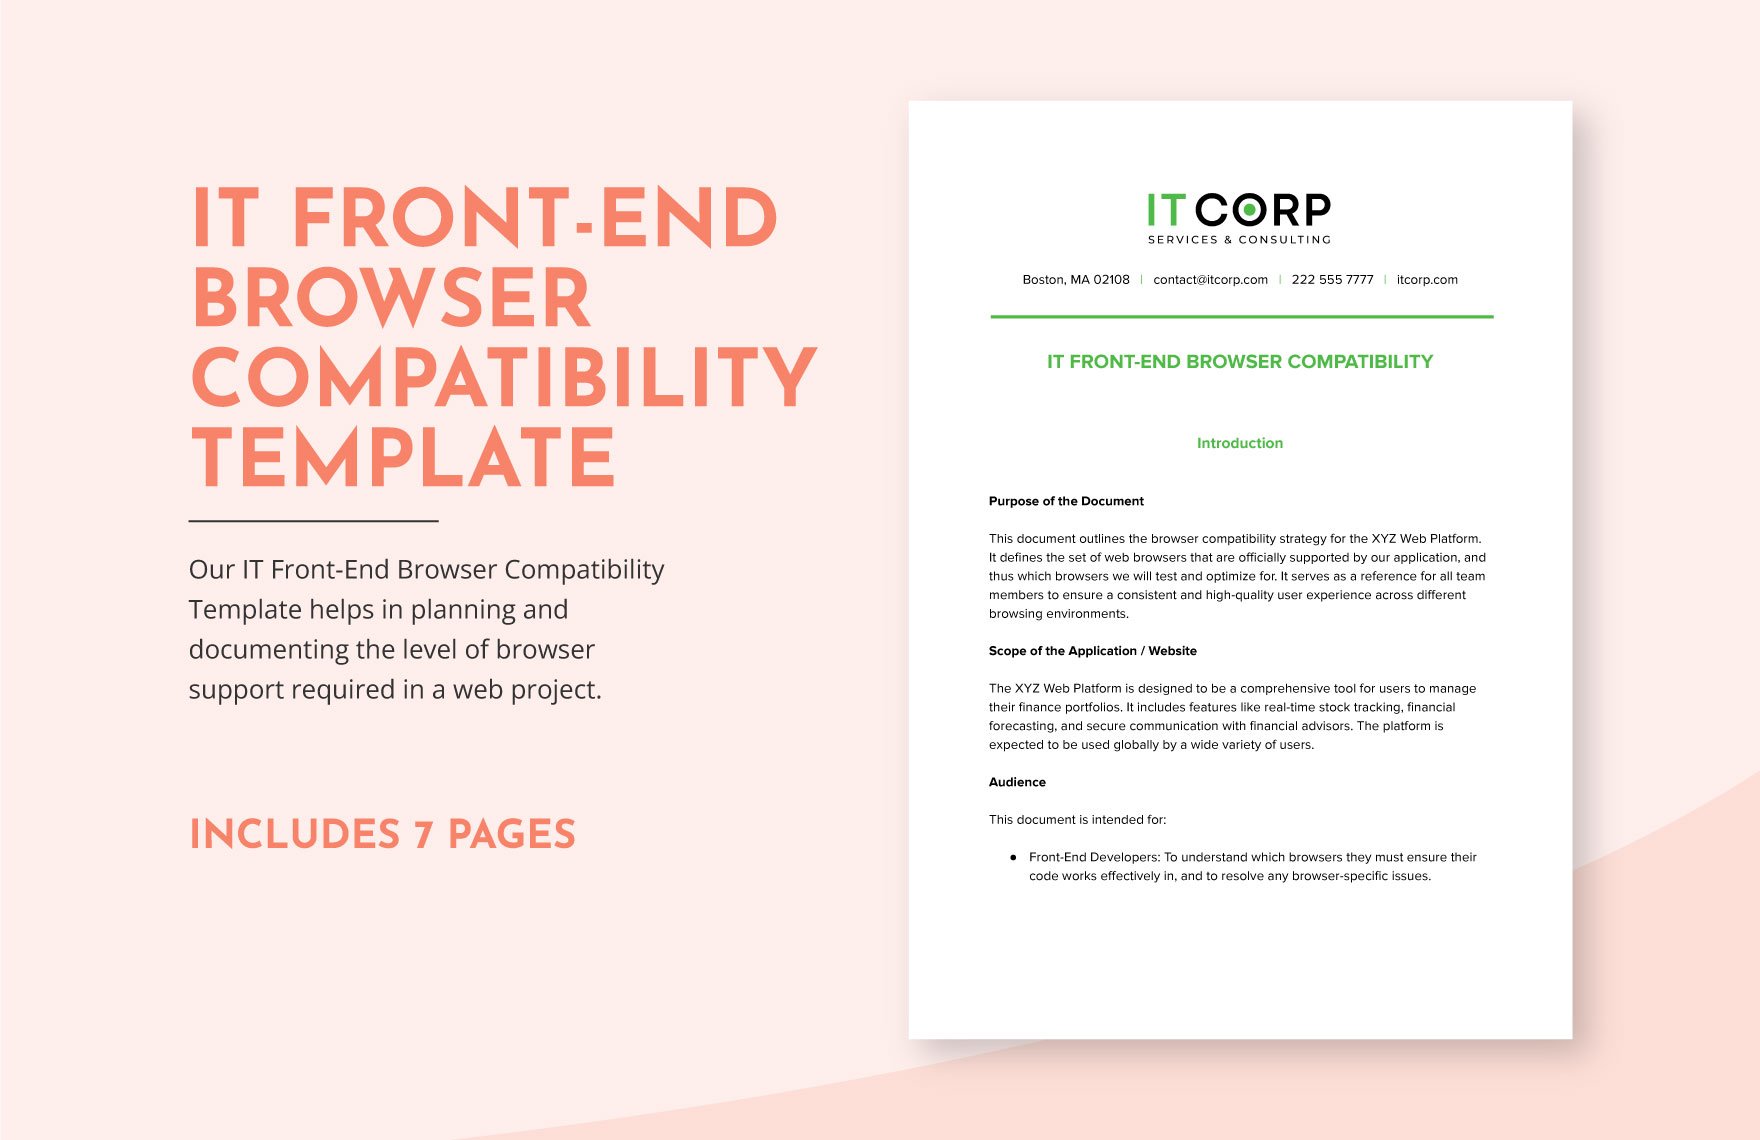 IT Front-End Browser Compatibility Template